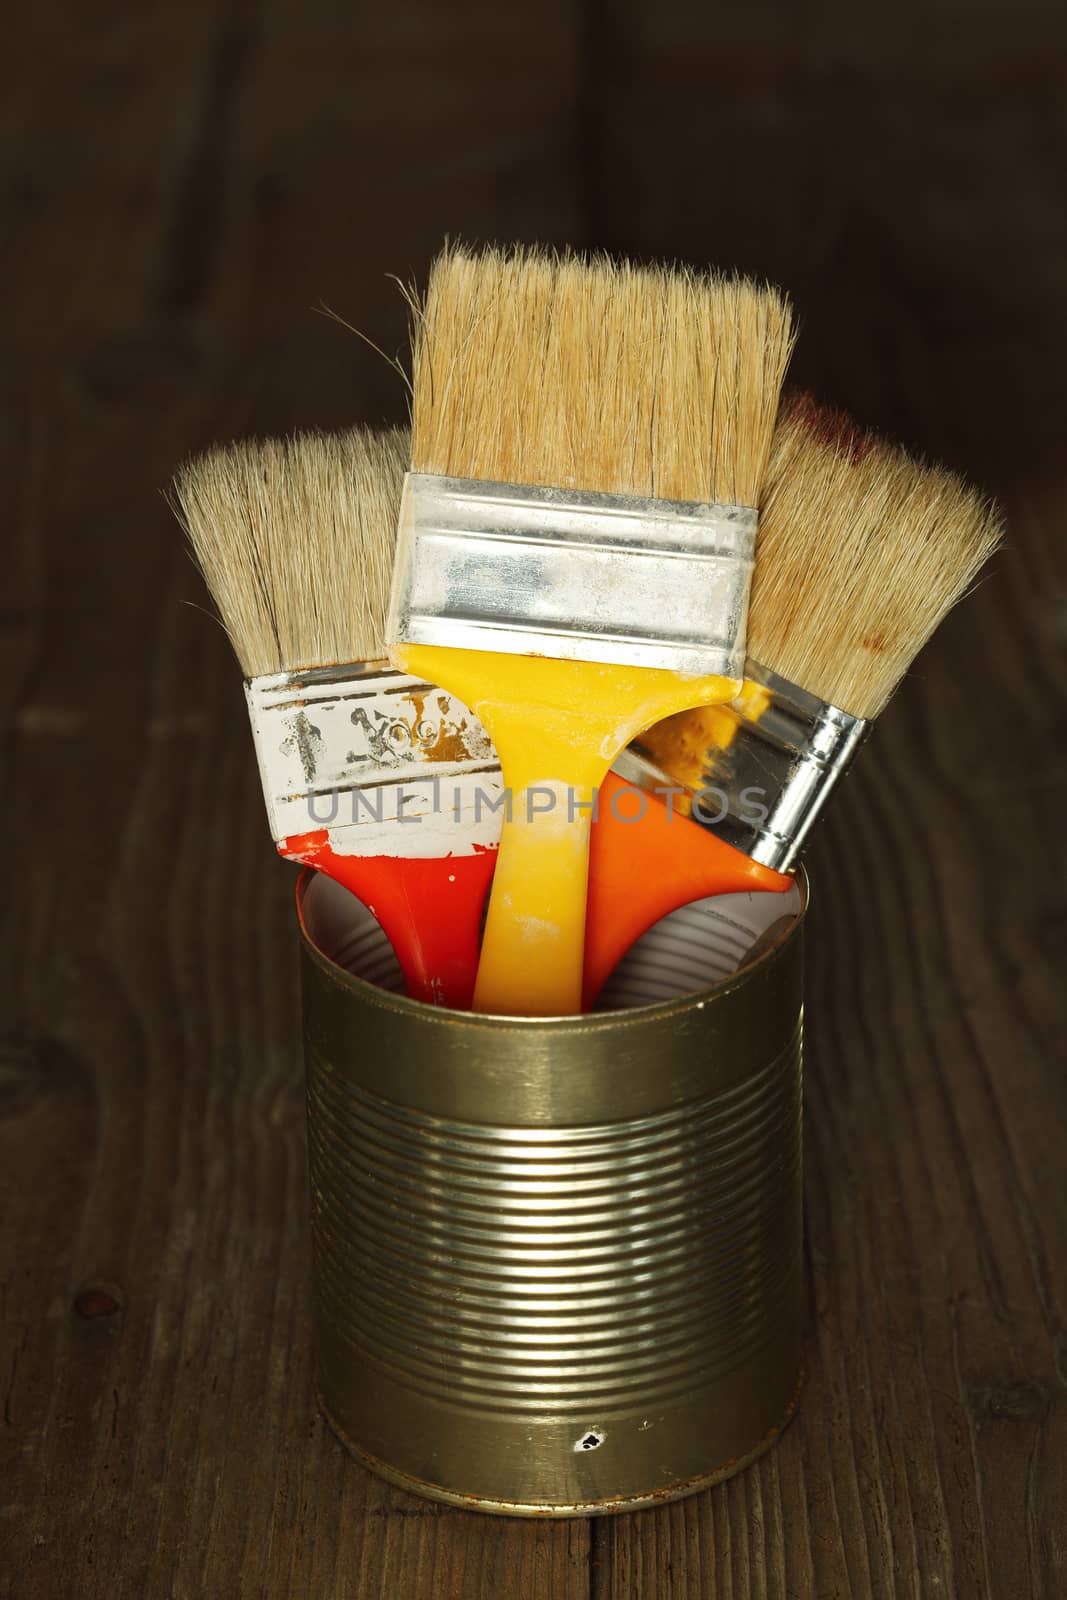 paint brushes by alexkosev